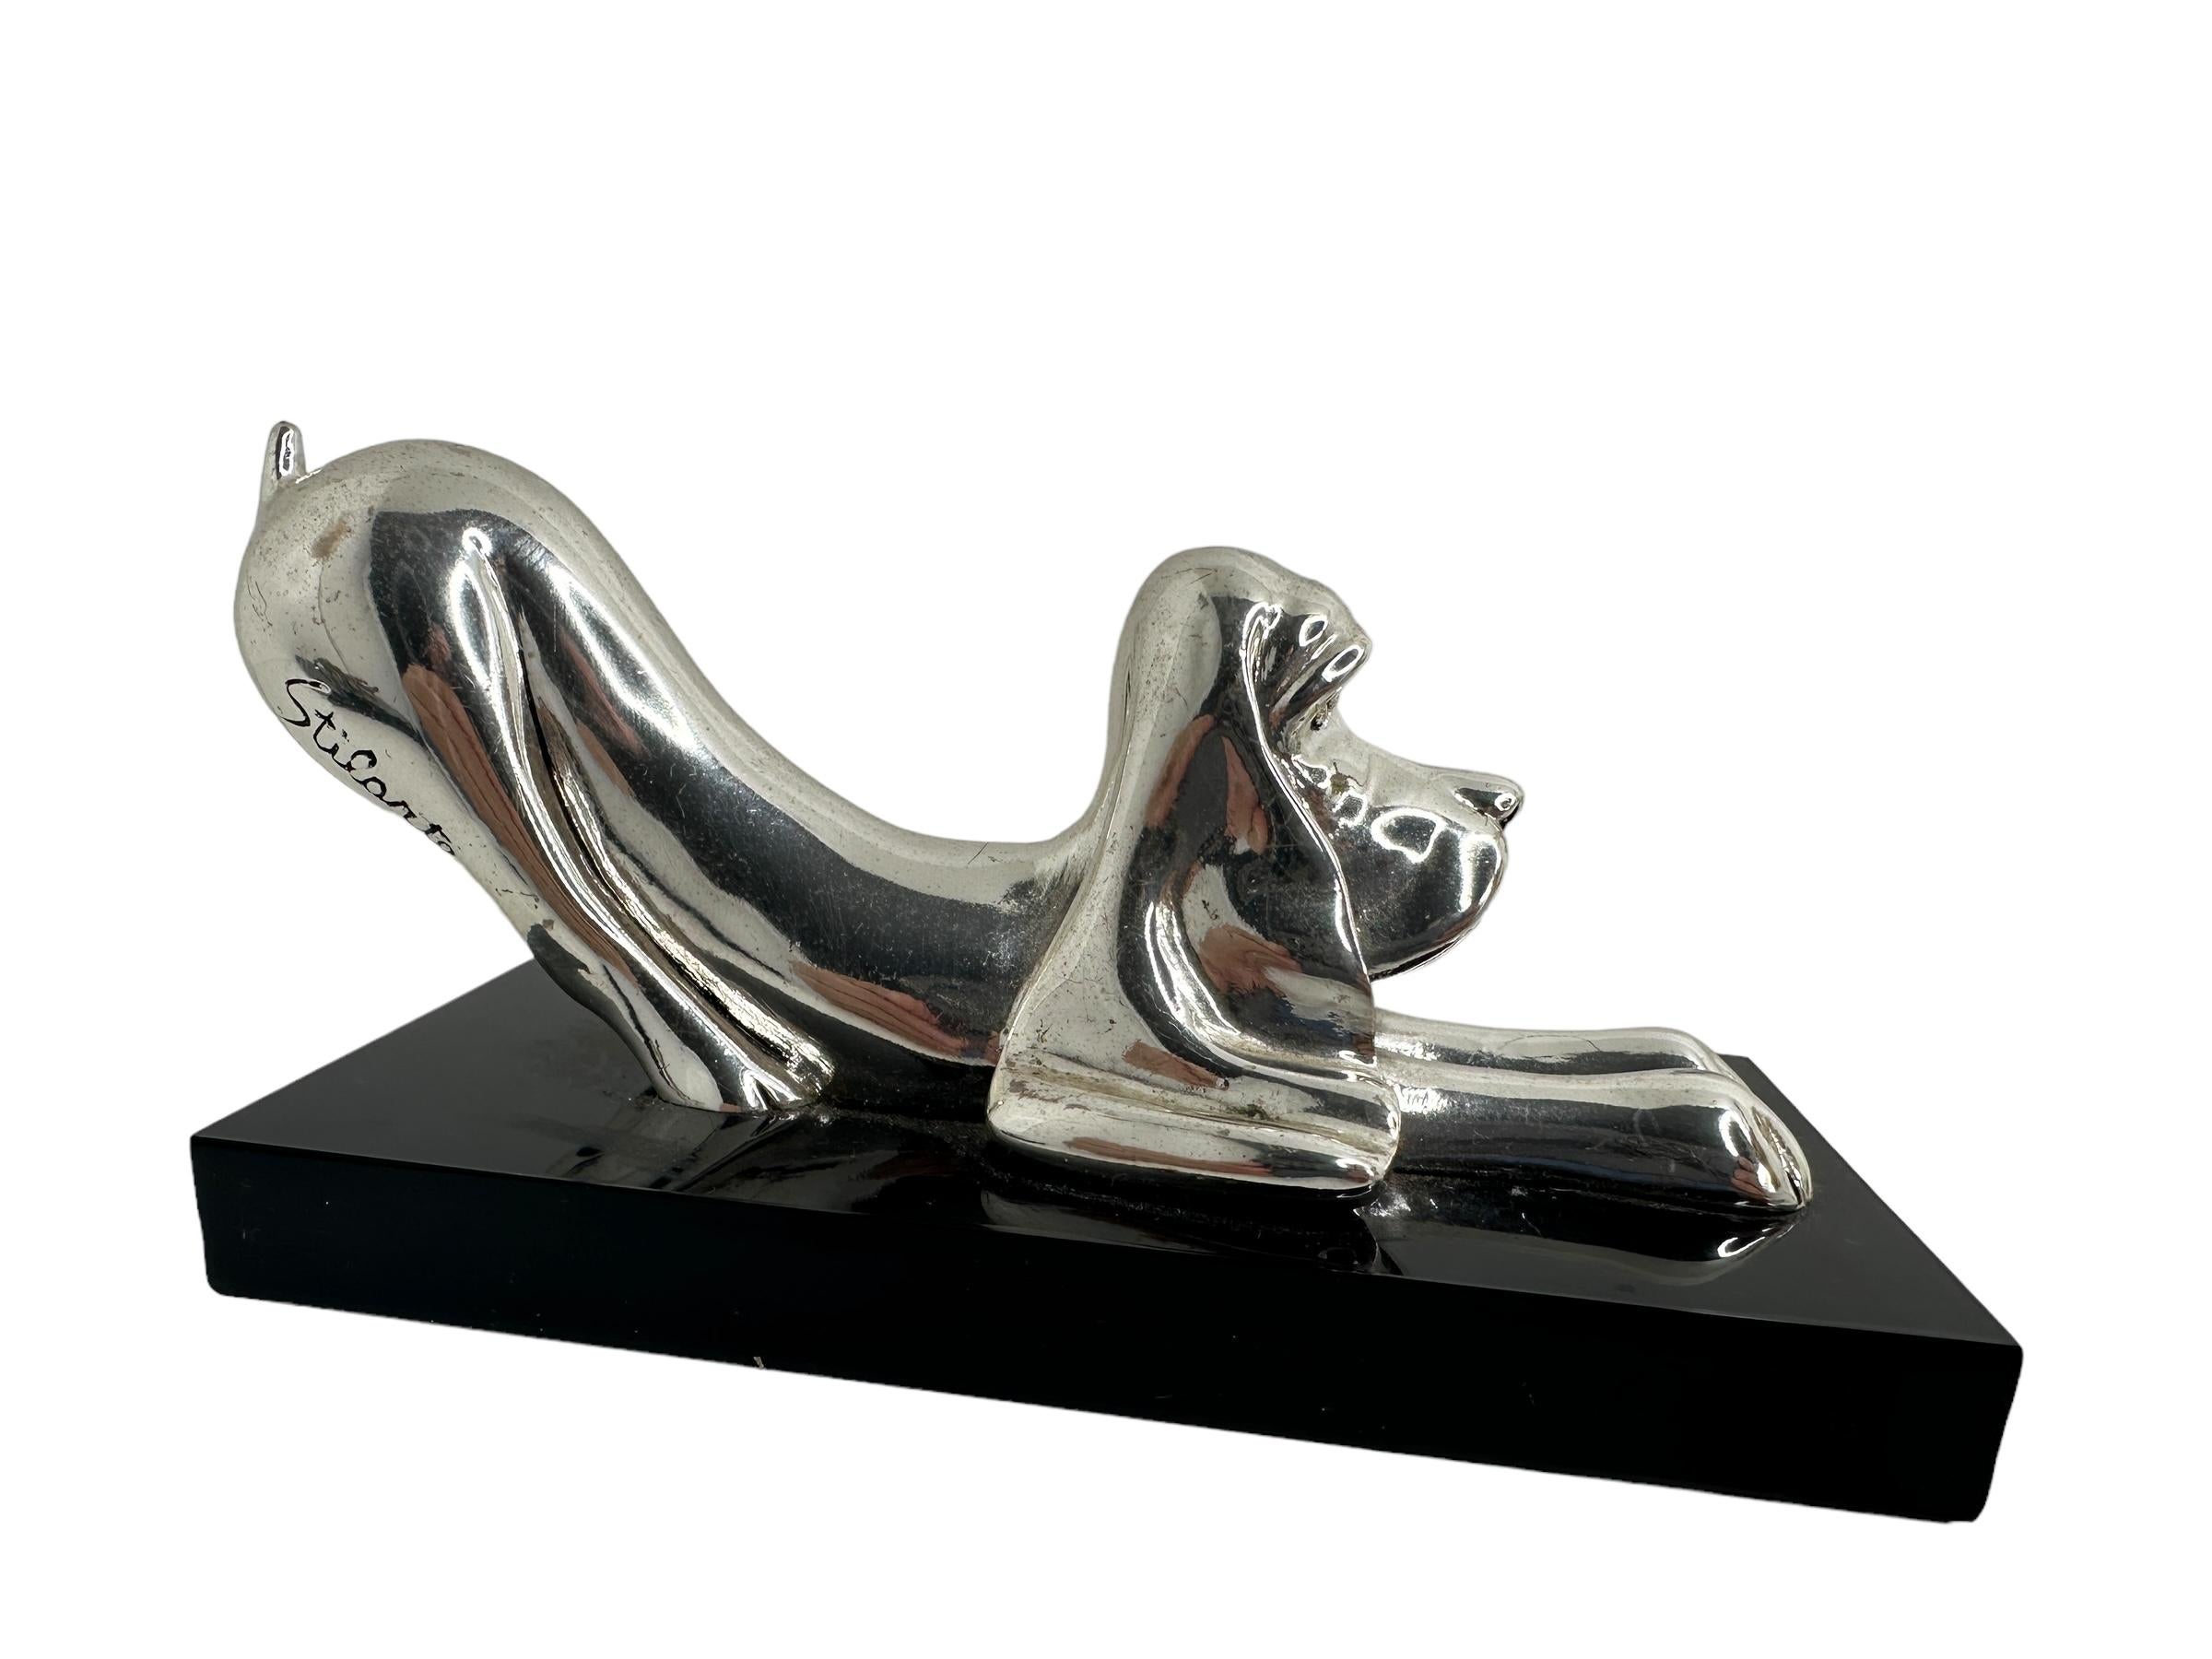 This chrome plated metal dog statue was made in the 1980s by Stilarte in Italy. It is signed and has the original label. This is a beautiful decorative piece, it can be displayed as a sculptural focal point on a credenza or sideboard or just at your